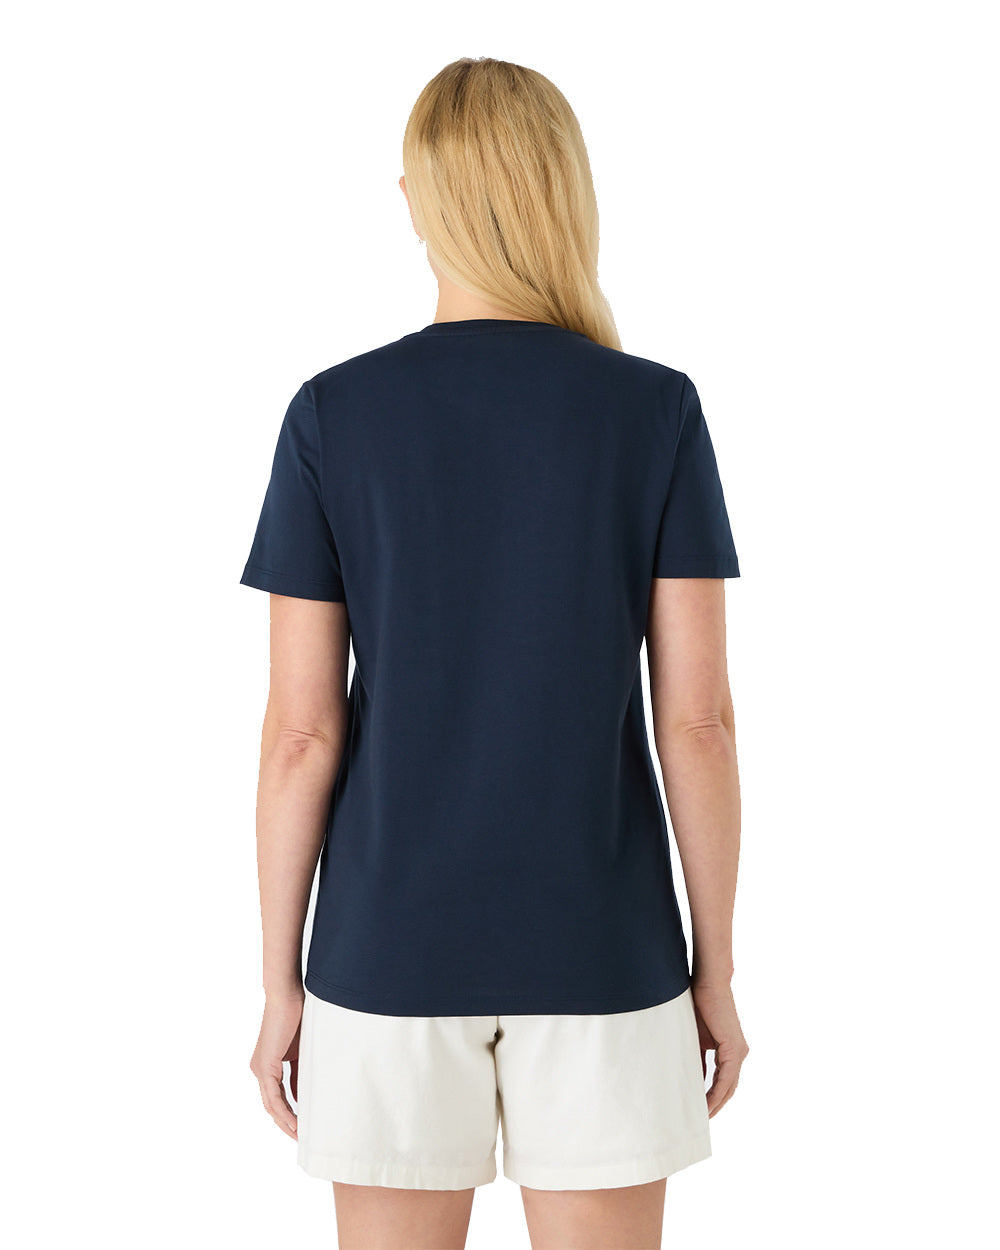 Navy Coloured Musto Womens 1964 Short Sleeve T-Shirt On A White Background 